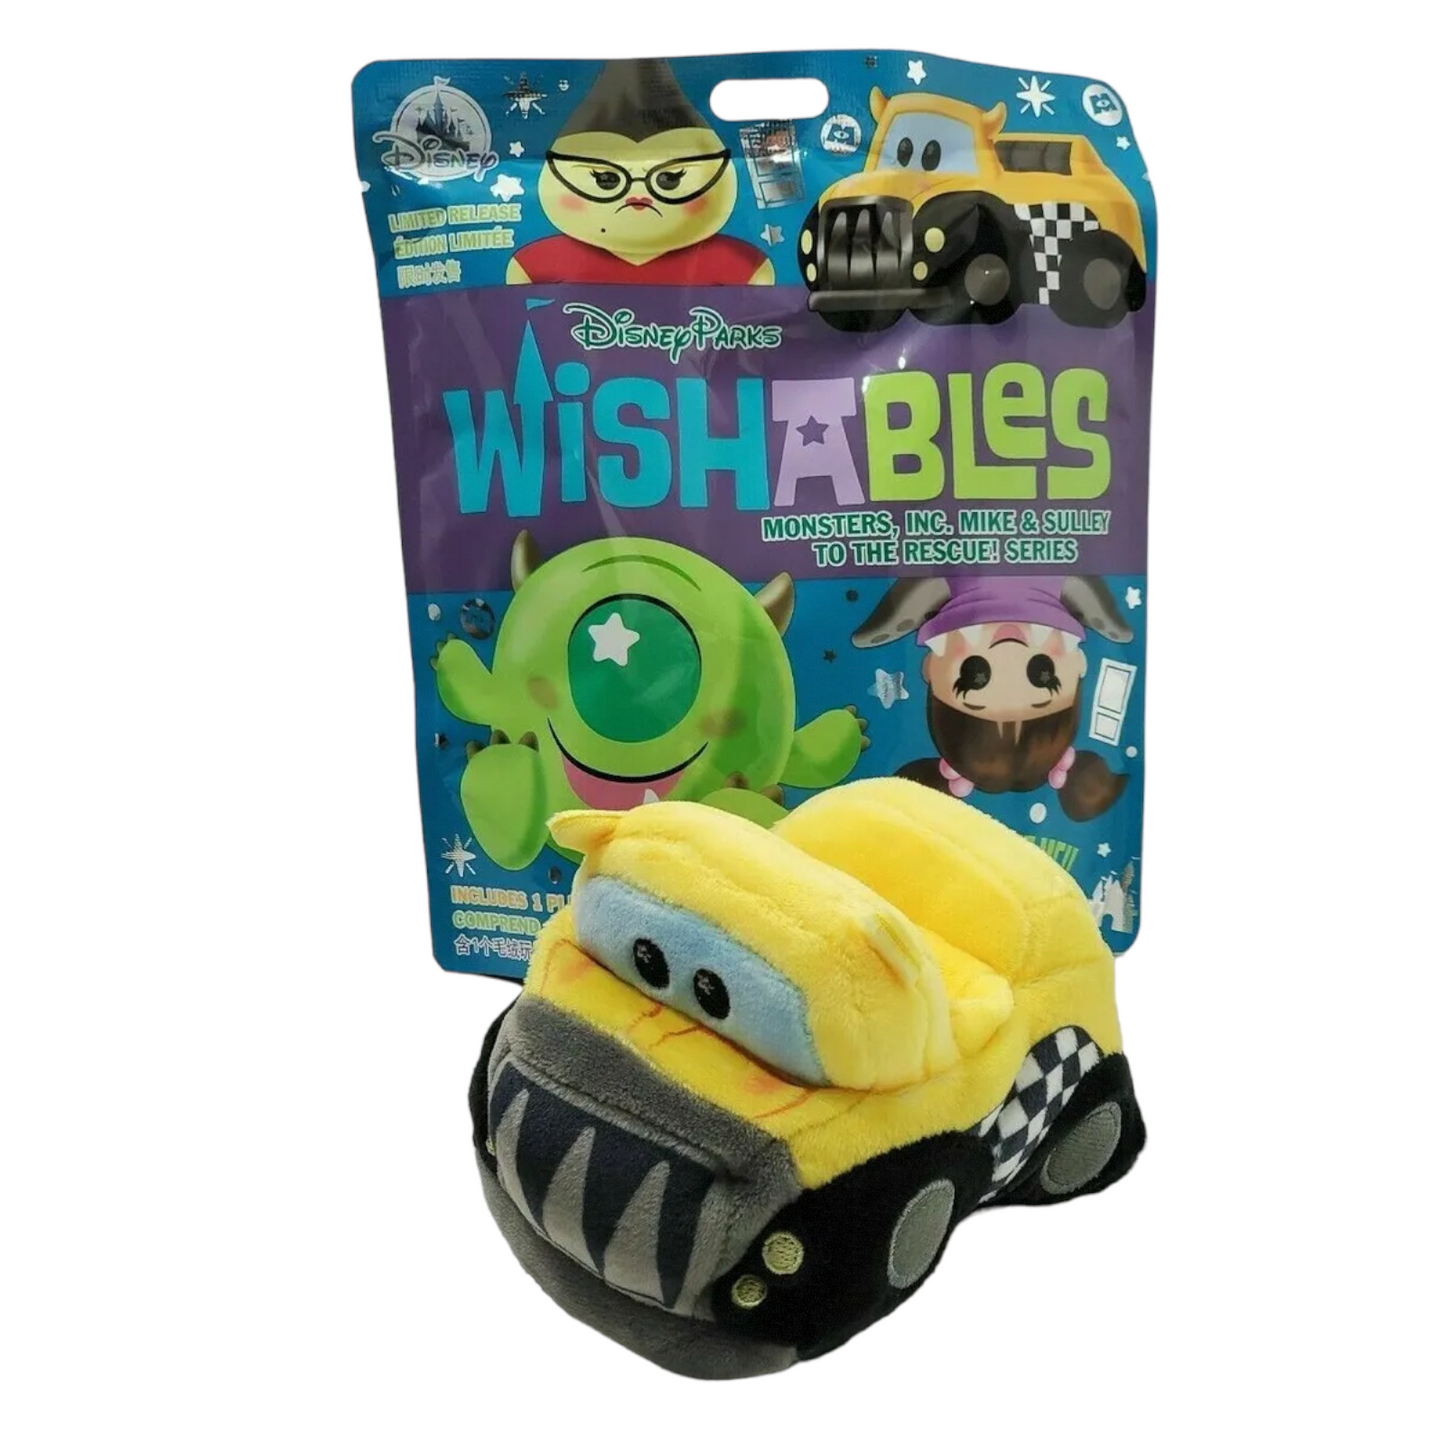 Monstropolis Transit Authority Taxi - Monsters, Inc. Mike & Sulley to the Rescue! Series Wishables Plush - Limited Release